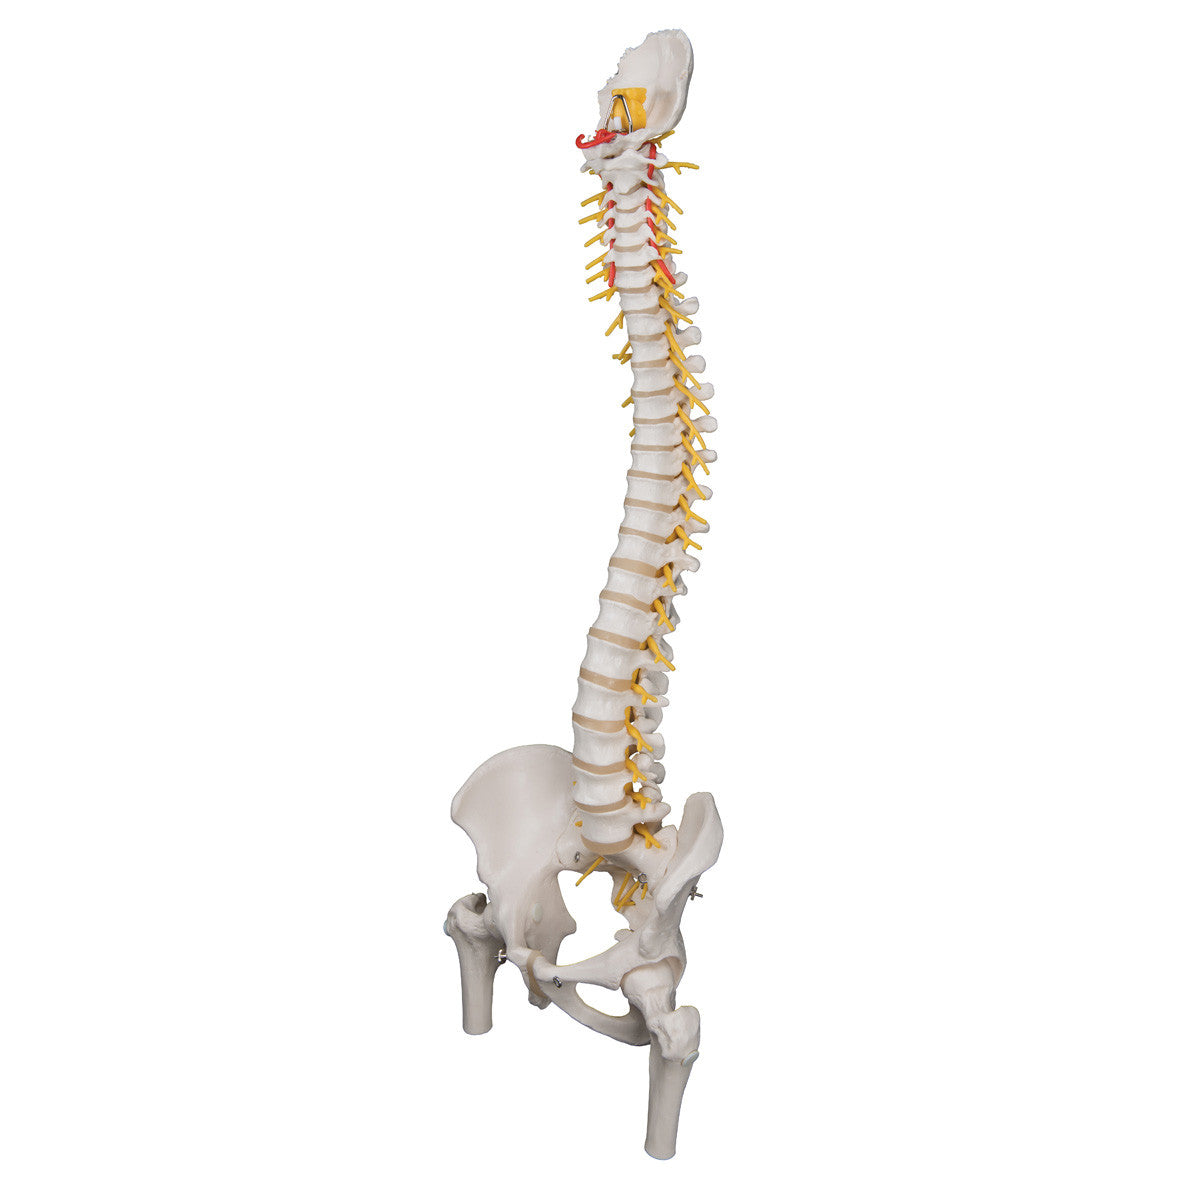 a58-6_03_1200_1200_deluxe-flexible-human-spine-model-with-femur-heads-sacral-opening-3b-smart-anatomy__88741.1589753153.1280.1280.jpg